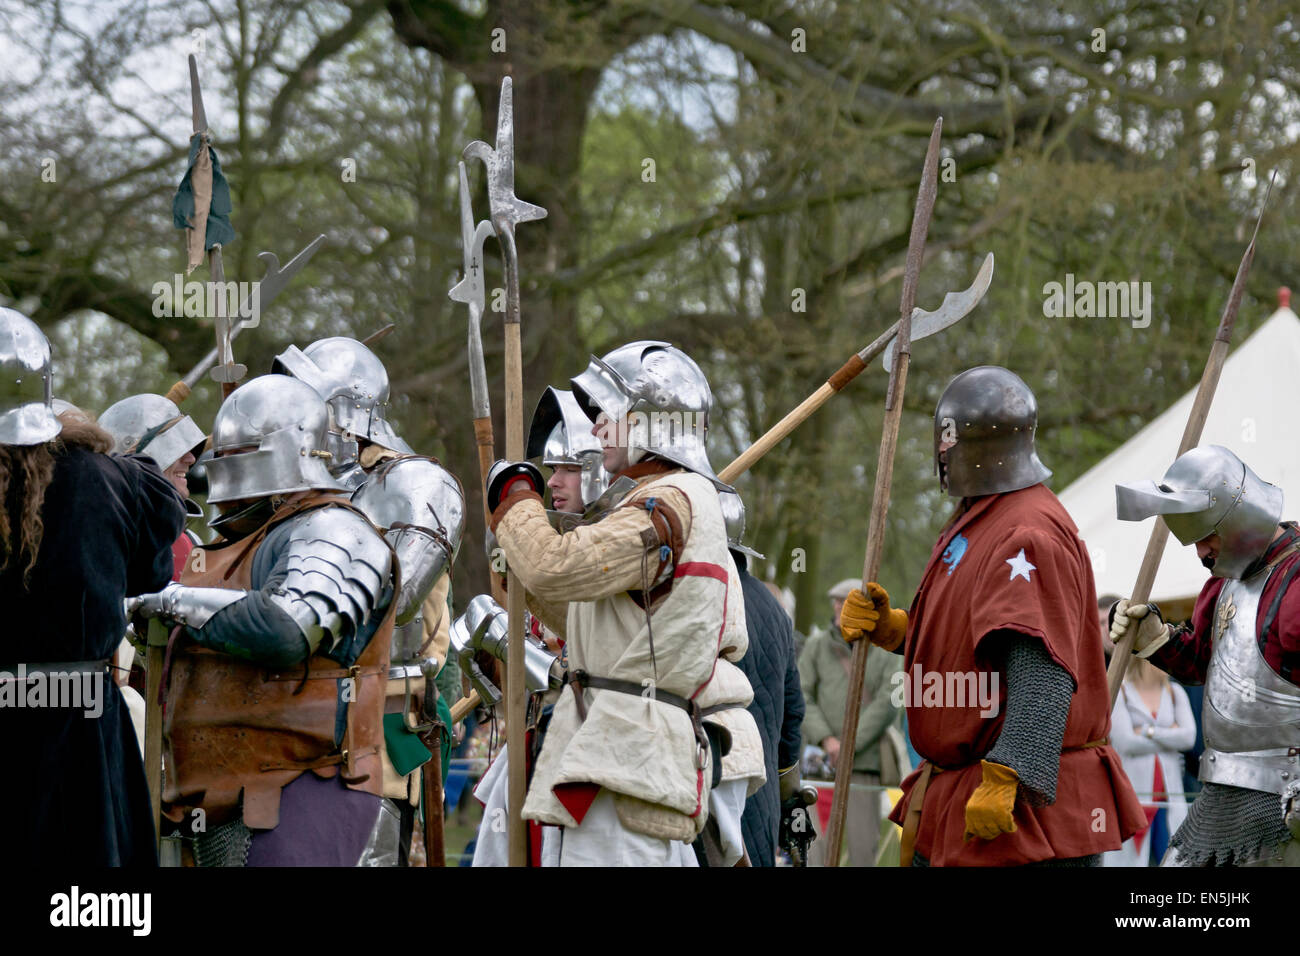 Medieval soldiers re-enactment Stock Photo